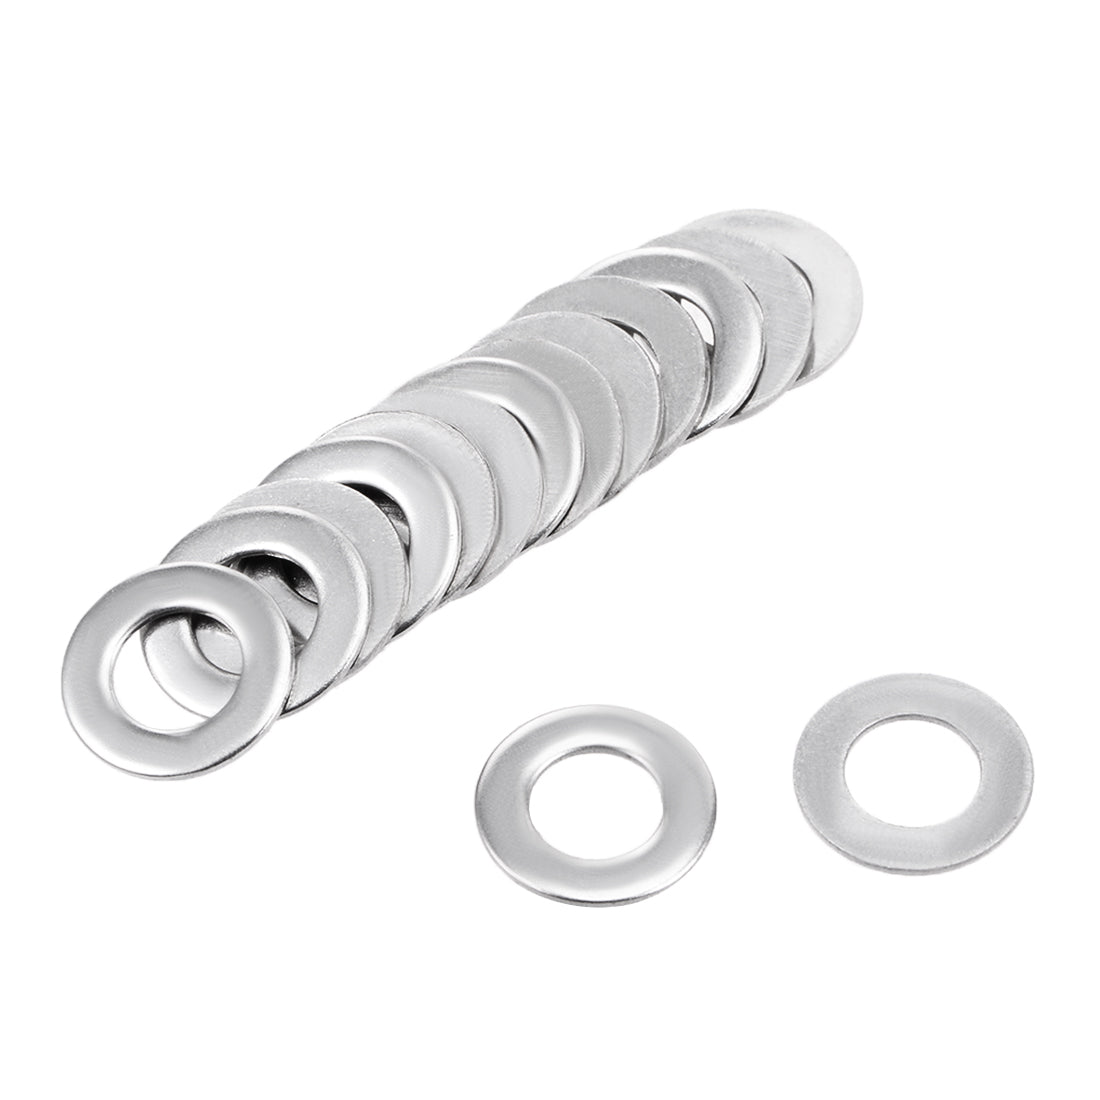 uxcell Uxcell 200 Pcs 12mm x 6.5mm x 0.8mm 304 Stainless Steel Flat Washer for Screw Bolt